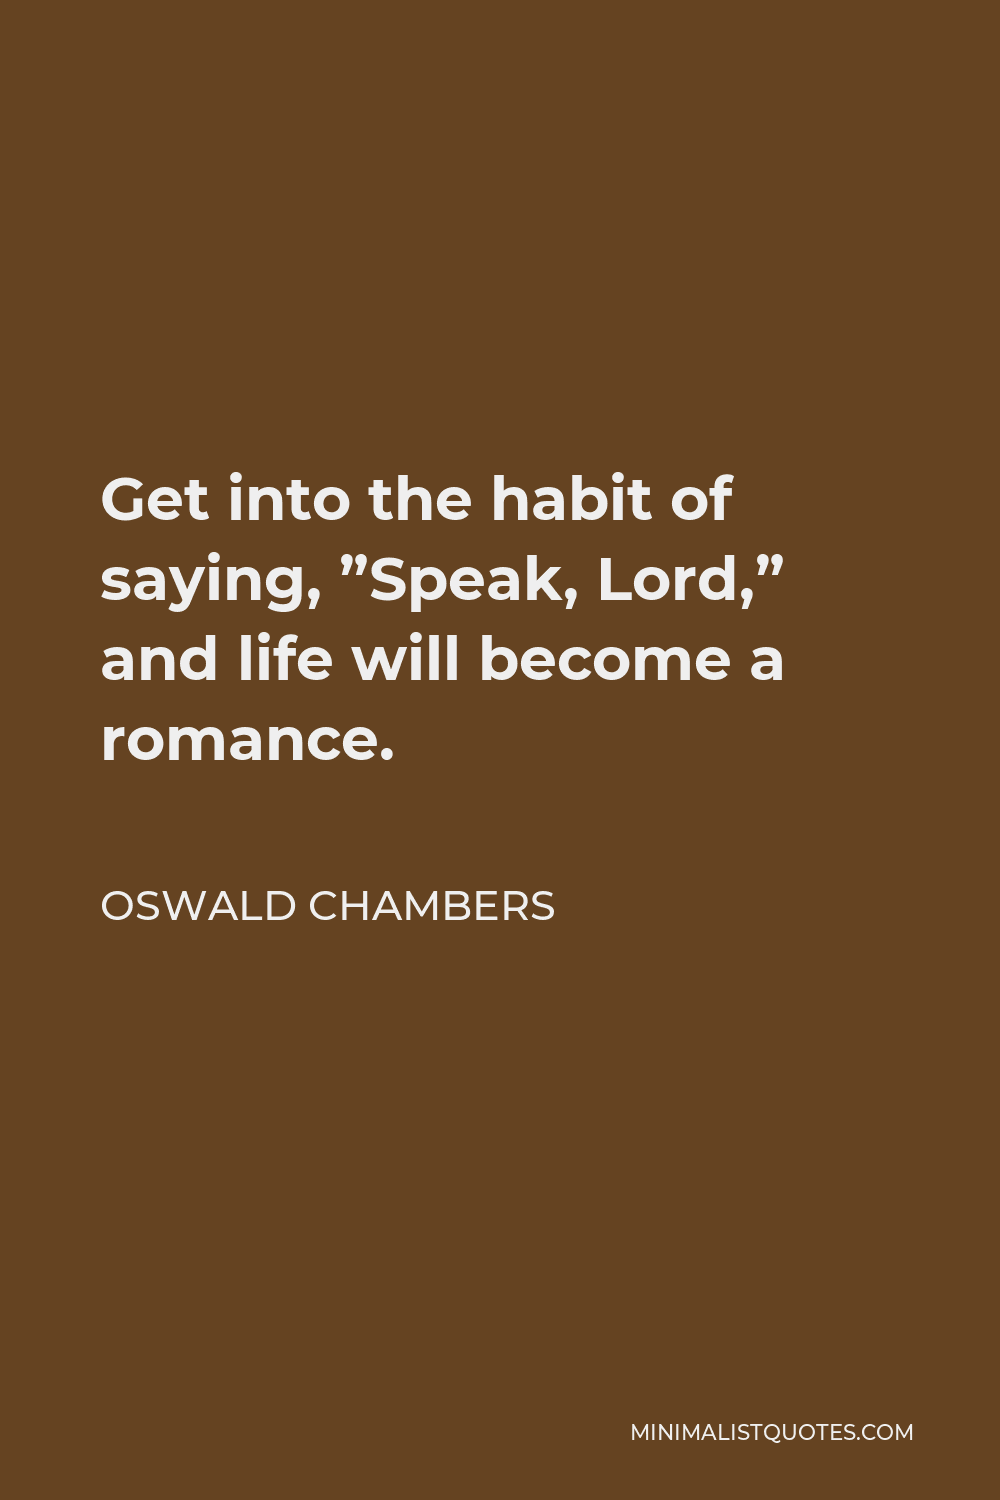 Oswald Chambers Quote - Get into the habit of saying, ”Speak, Lord,” and life will become a romance.